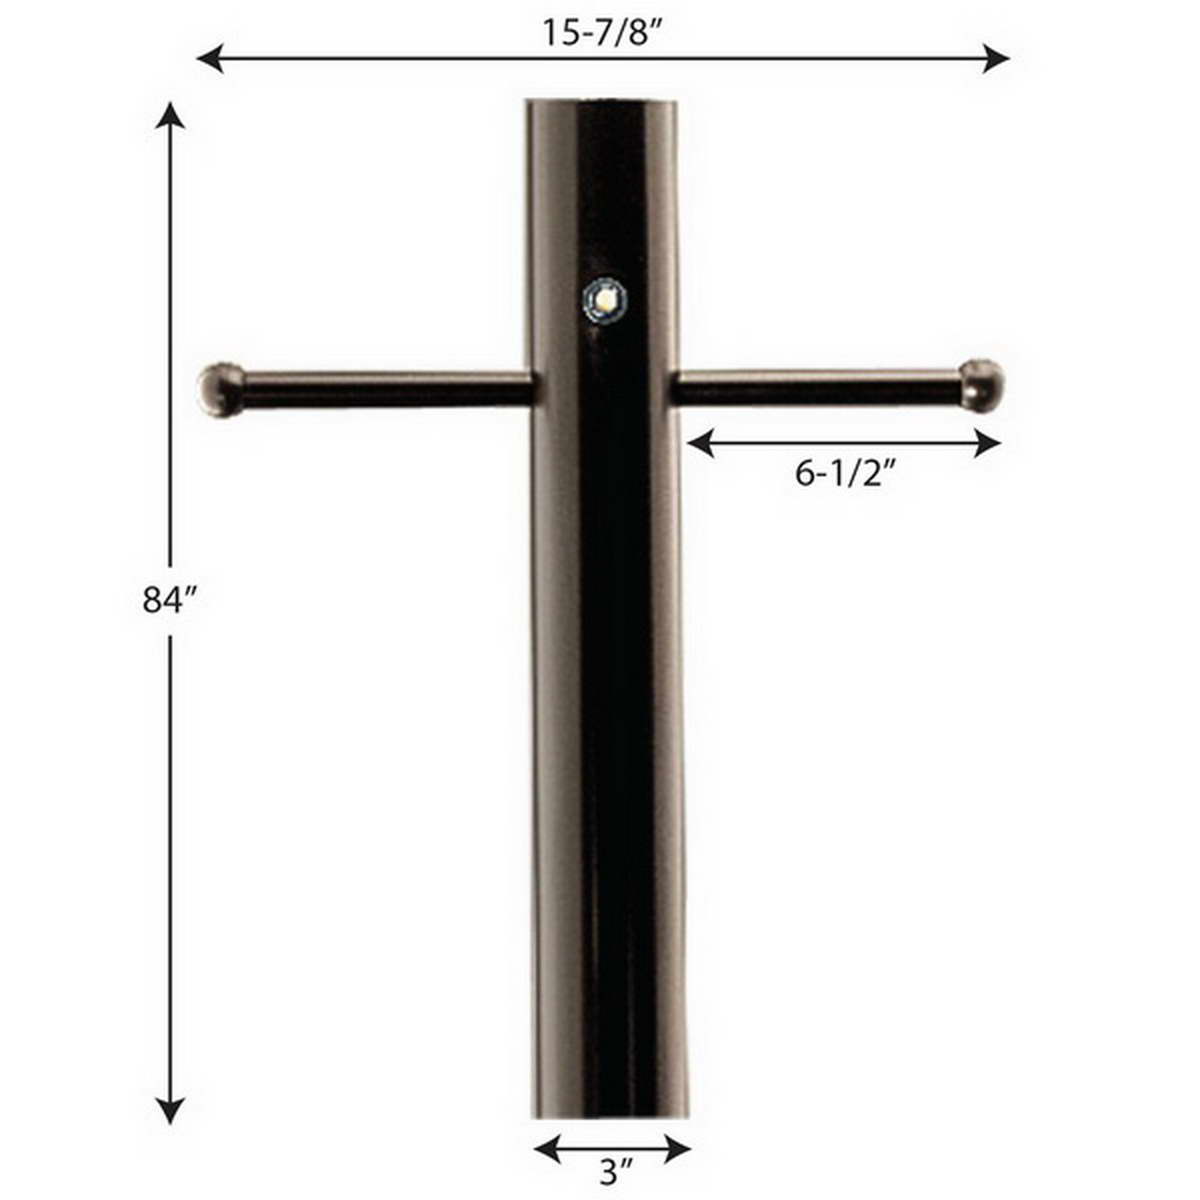 7 Ft Round Aluminum Direct Burial Pole with Photocell 3 In. Shaft Bronze Finish